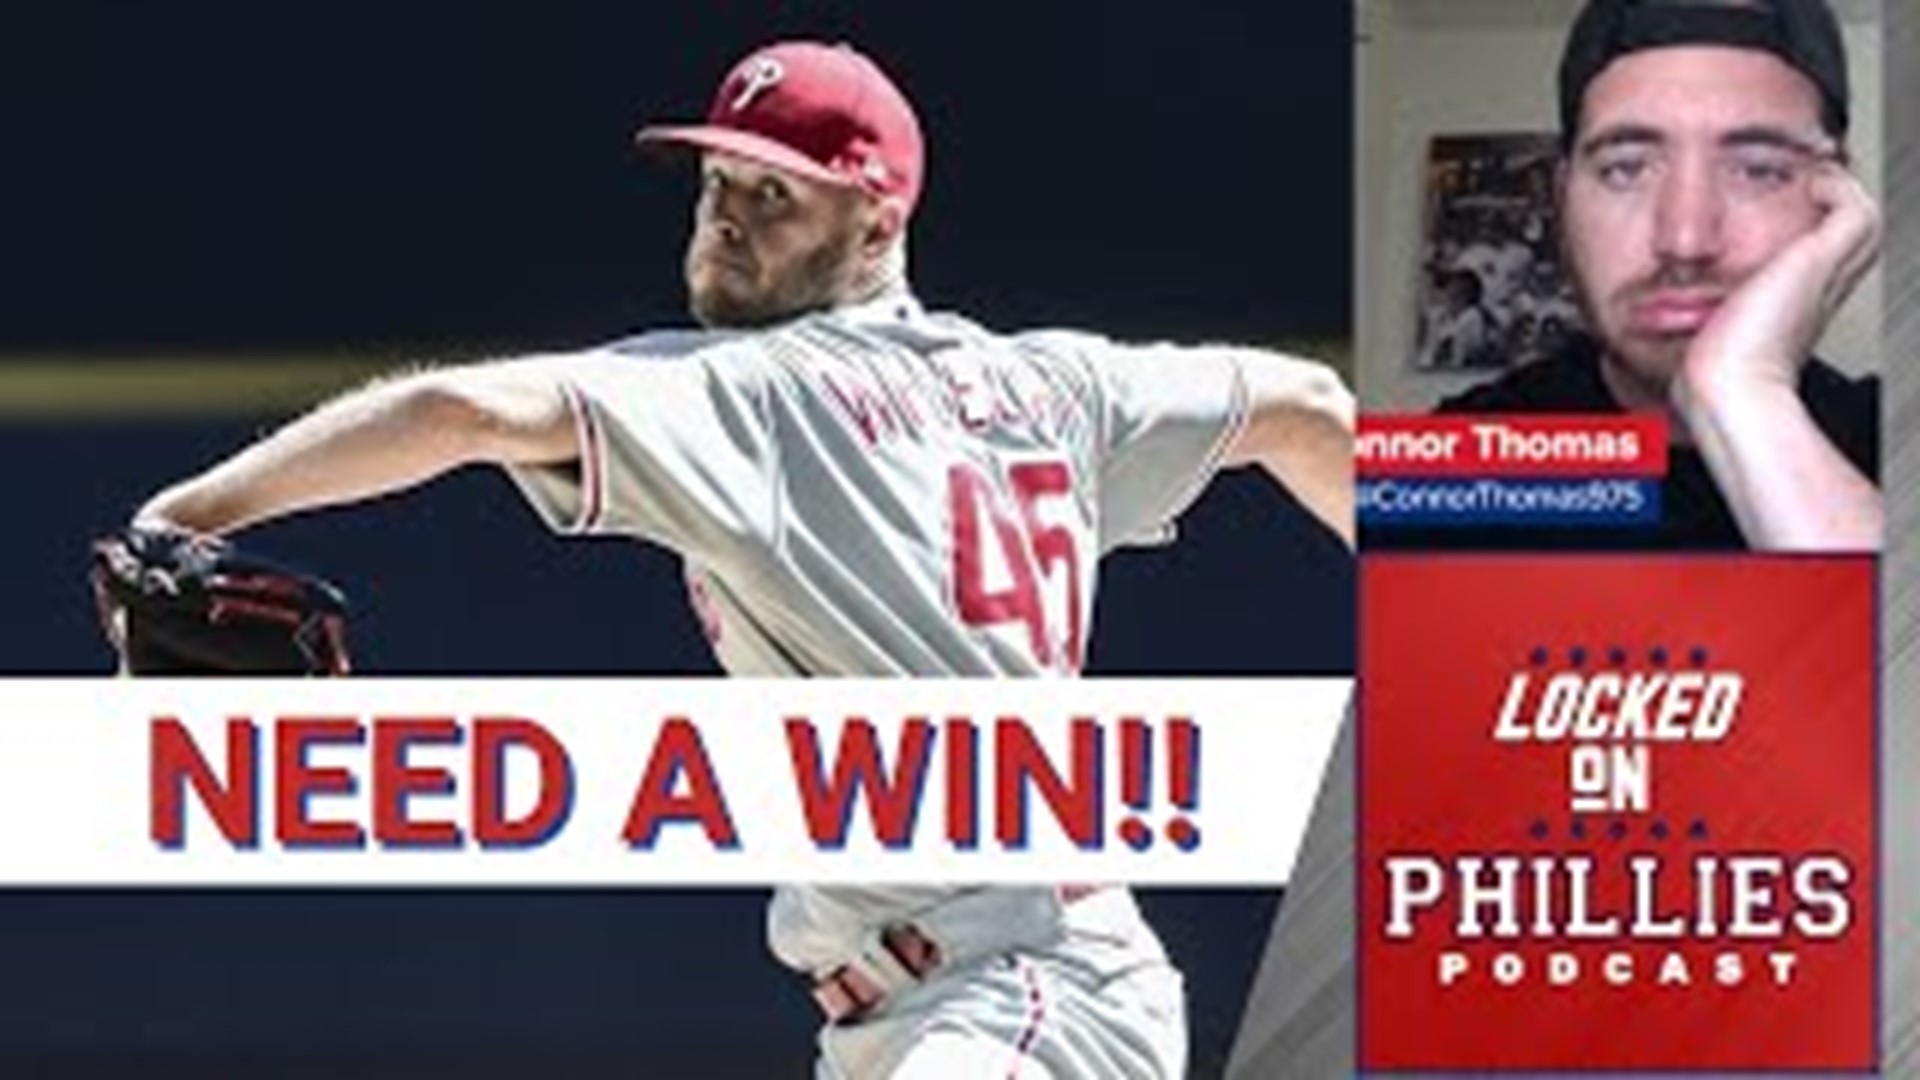 In today's episode, Connor discusses the Philadelphia Phillies' awful 18-11 loss to the Toronto Blue Jays last night in a game that the pitching for the Phillies loo